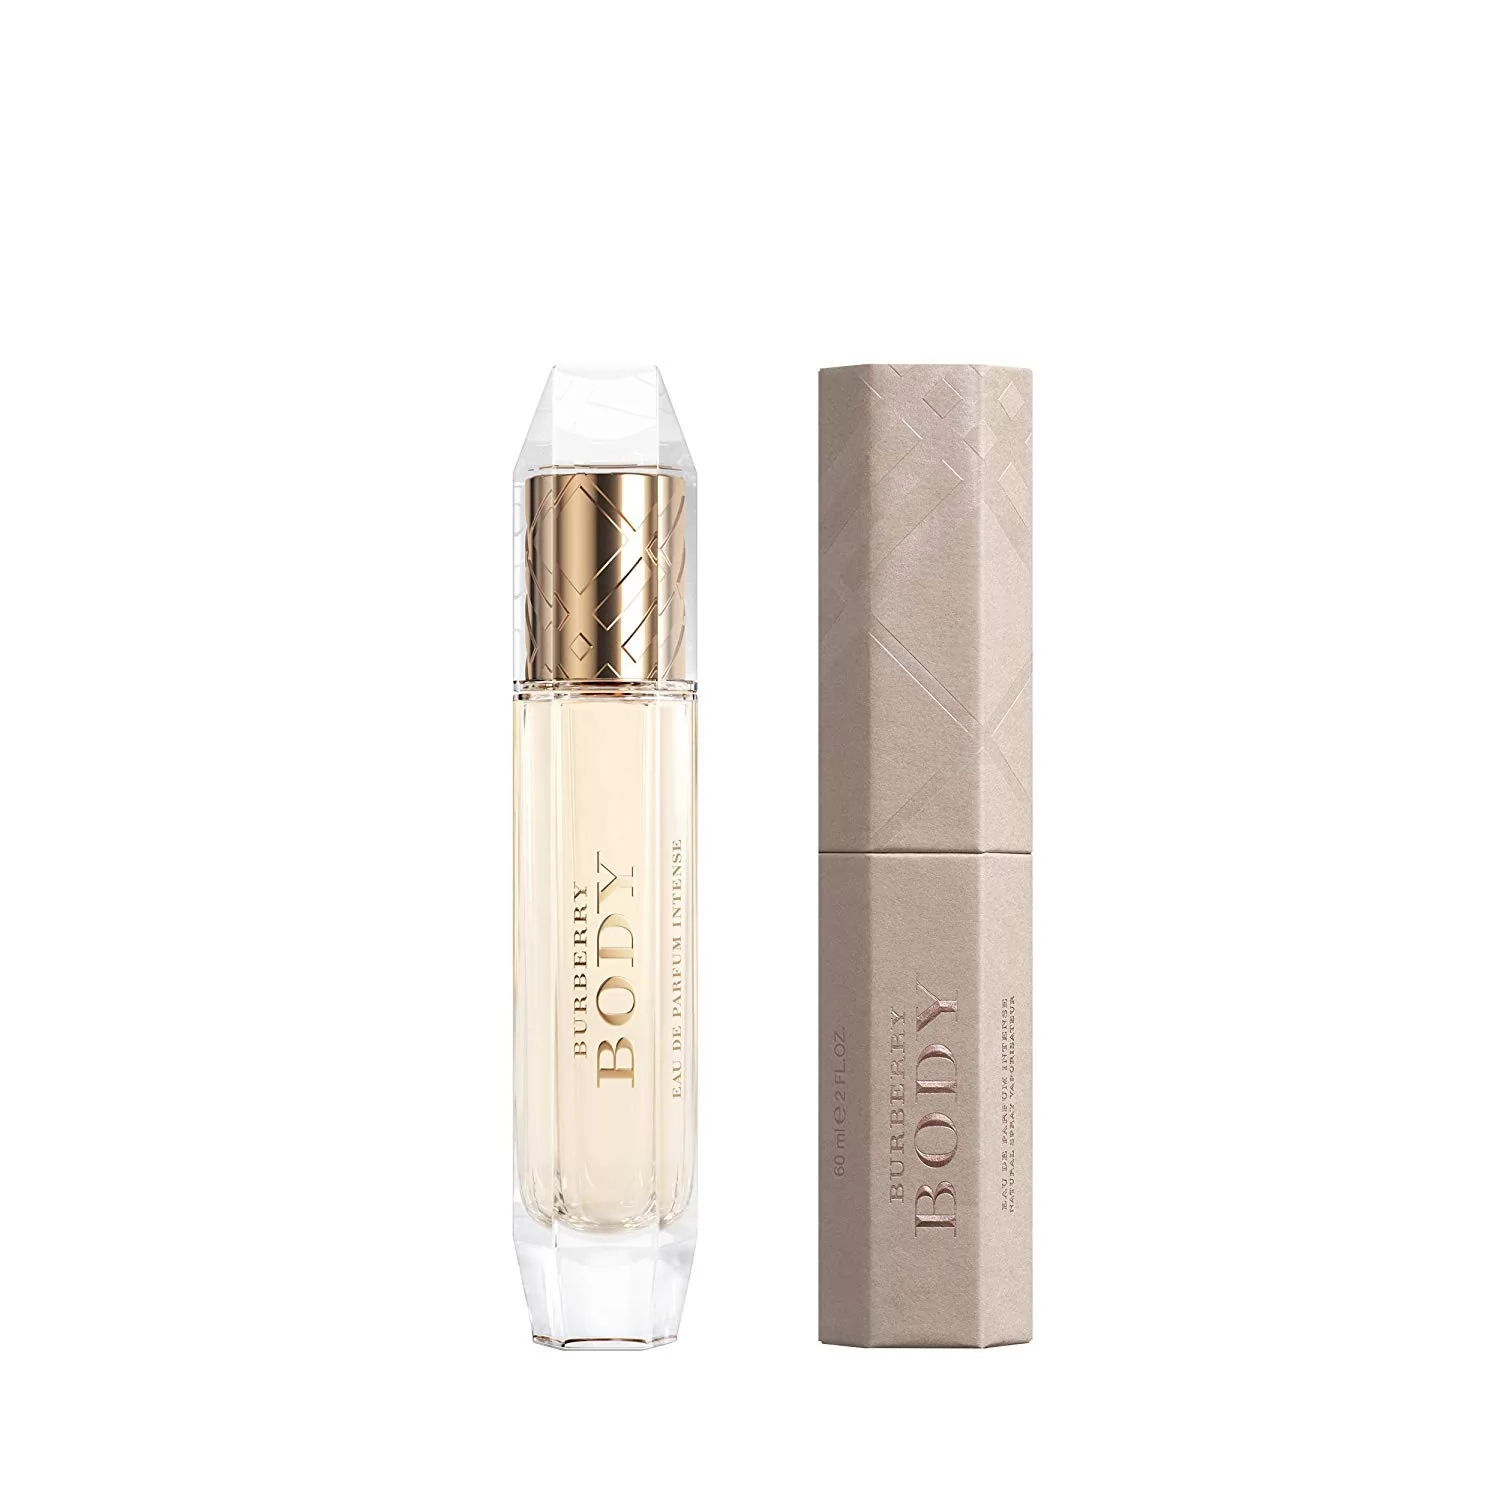 Burberry Body Intense by Burberry for Women